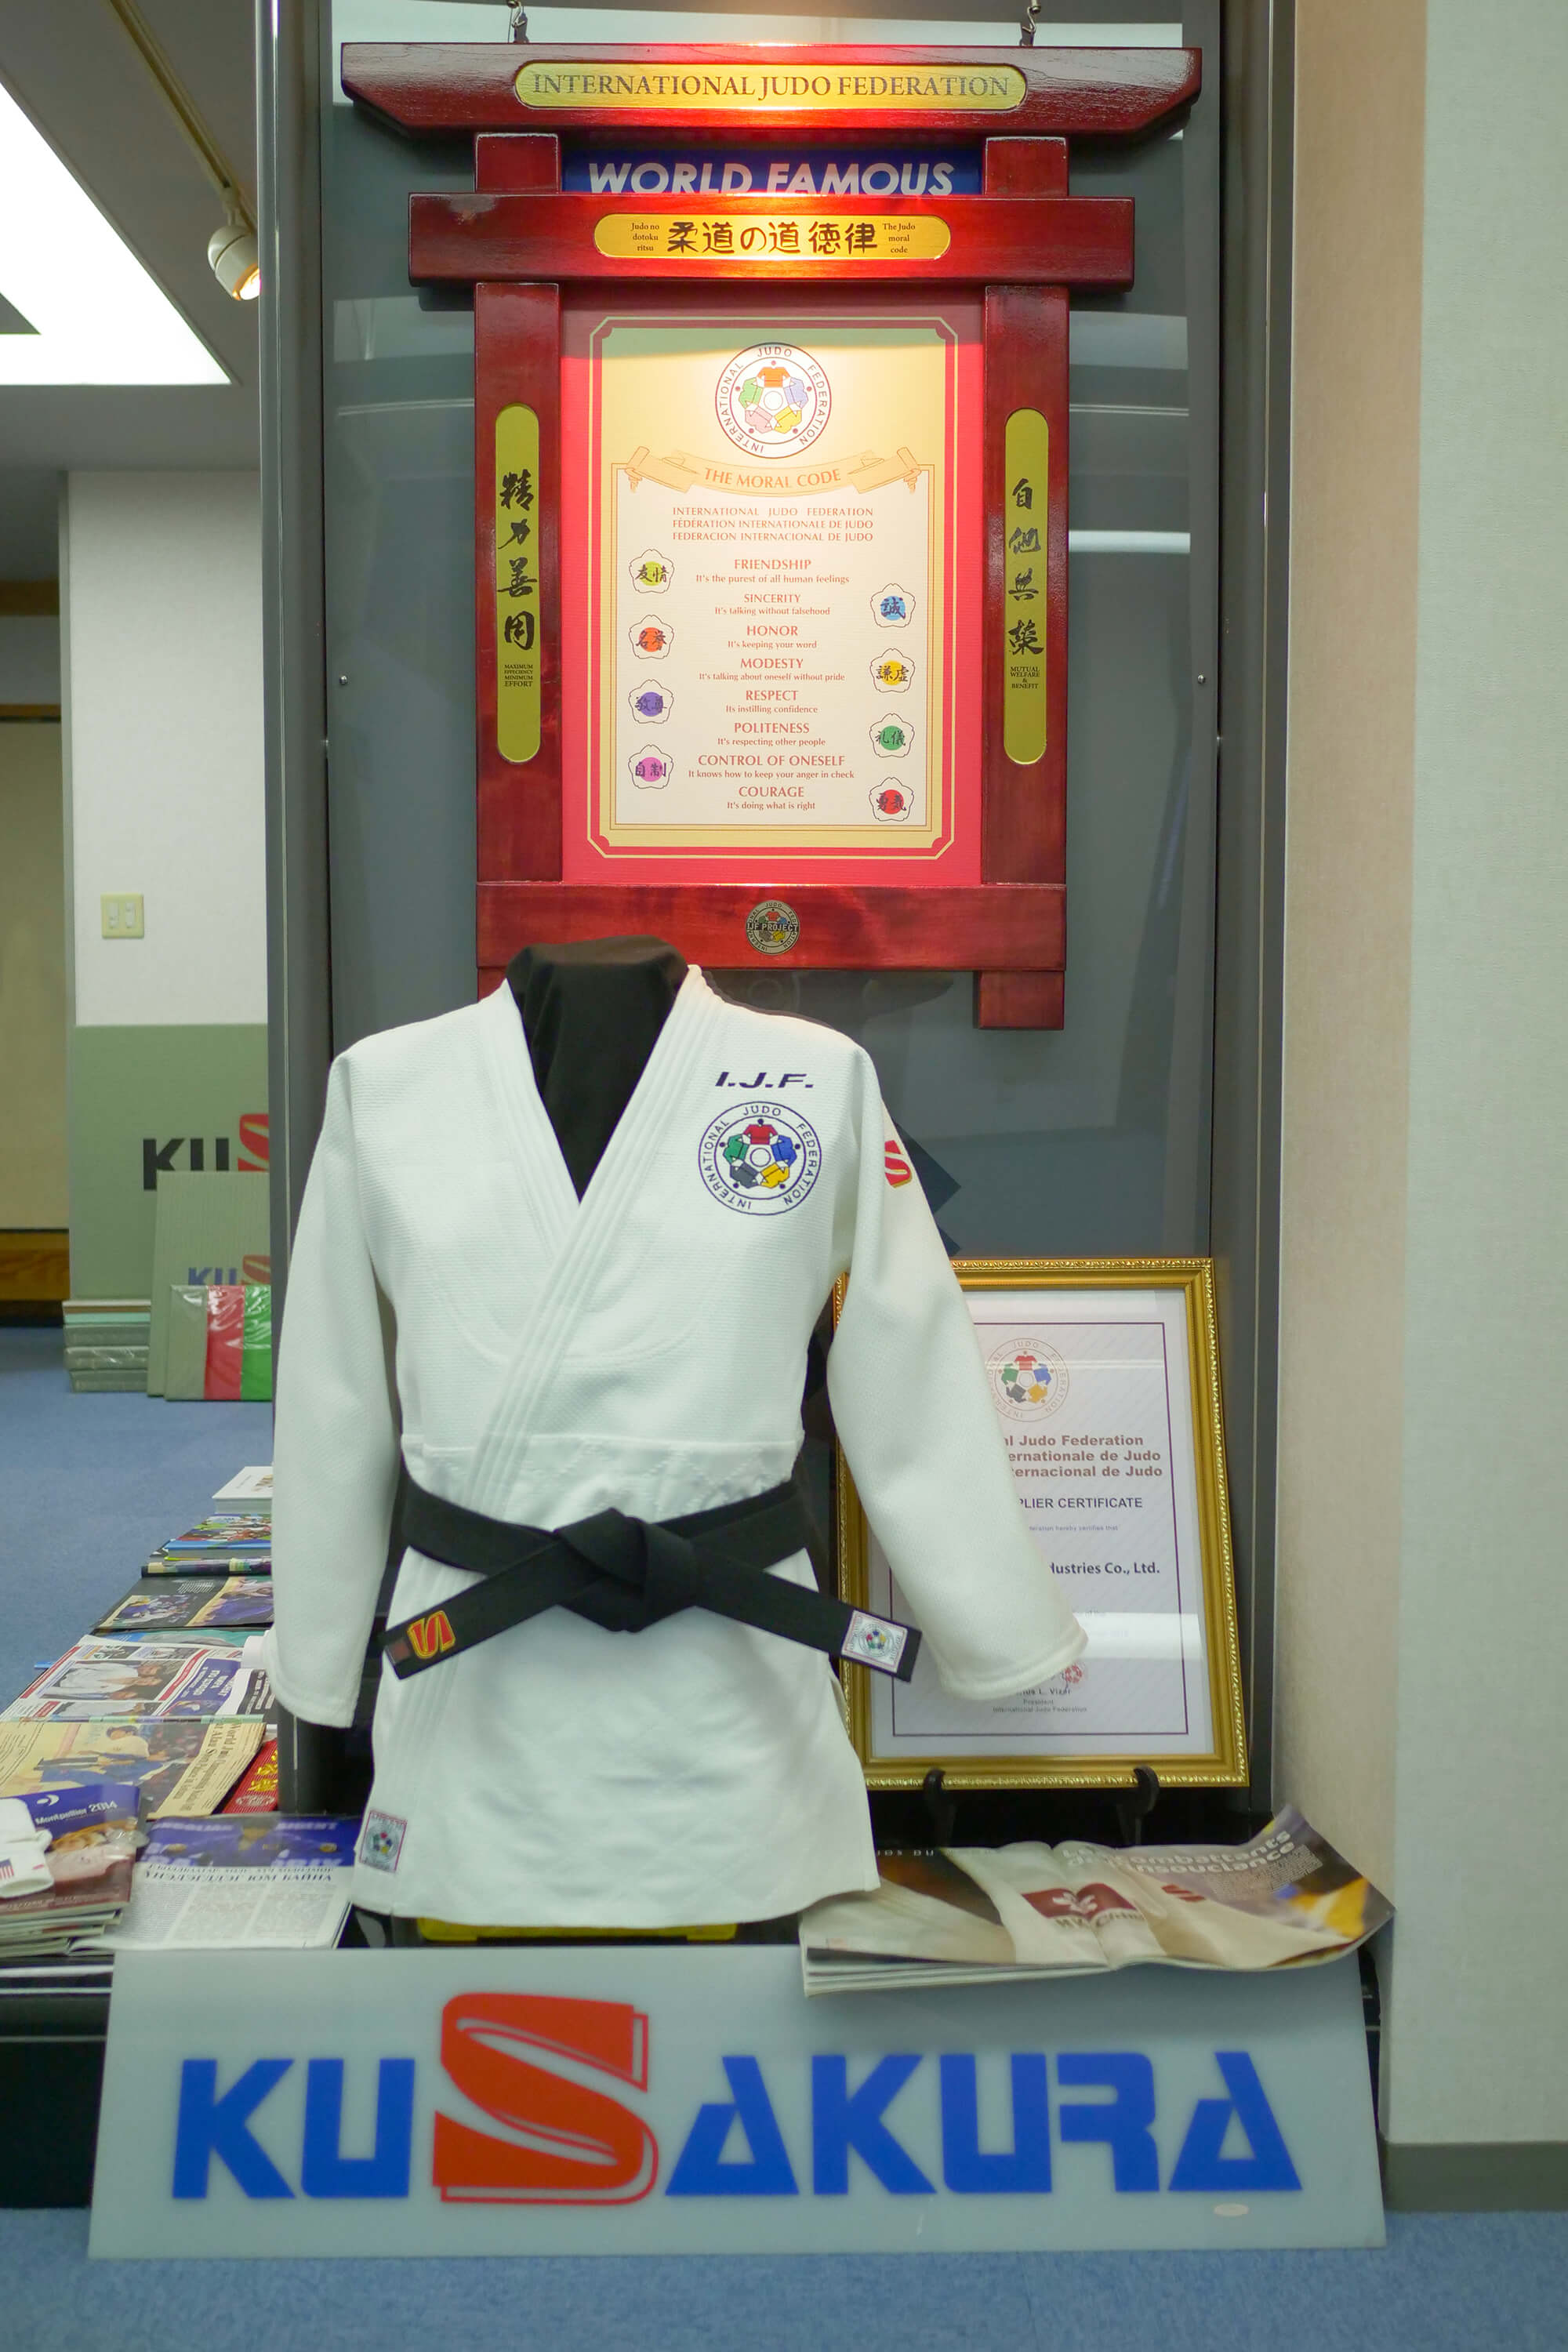 KuSakura offices' decoration with IJF certification